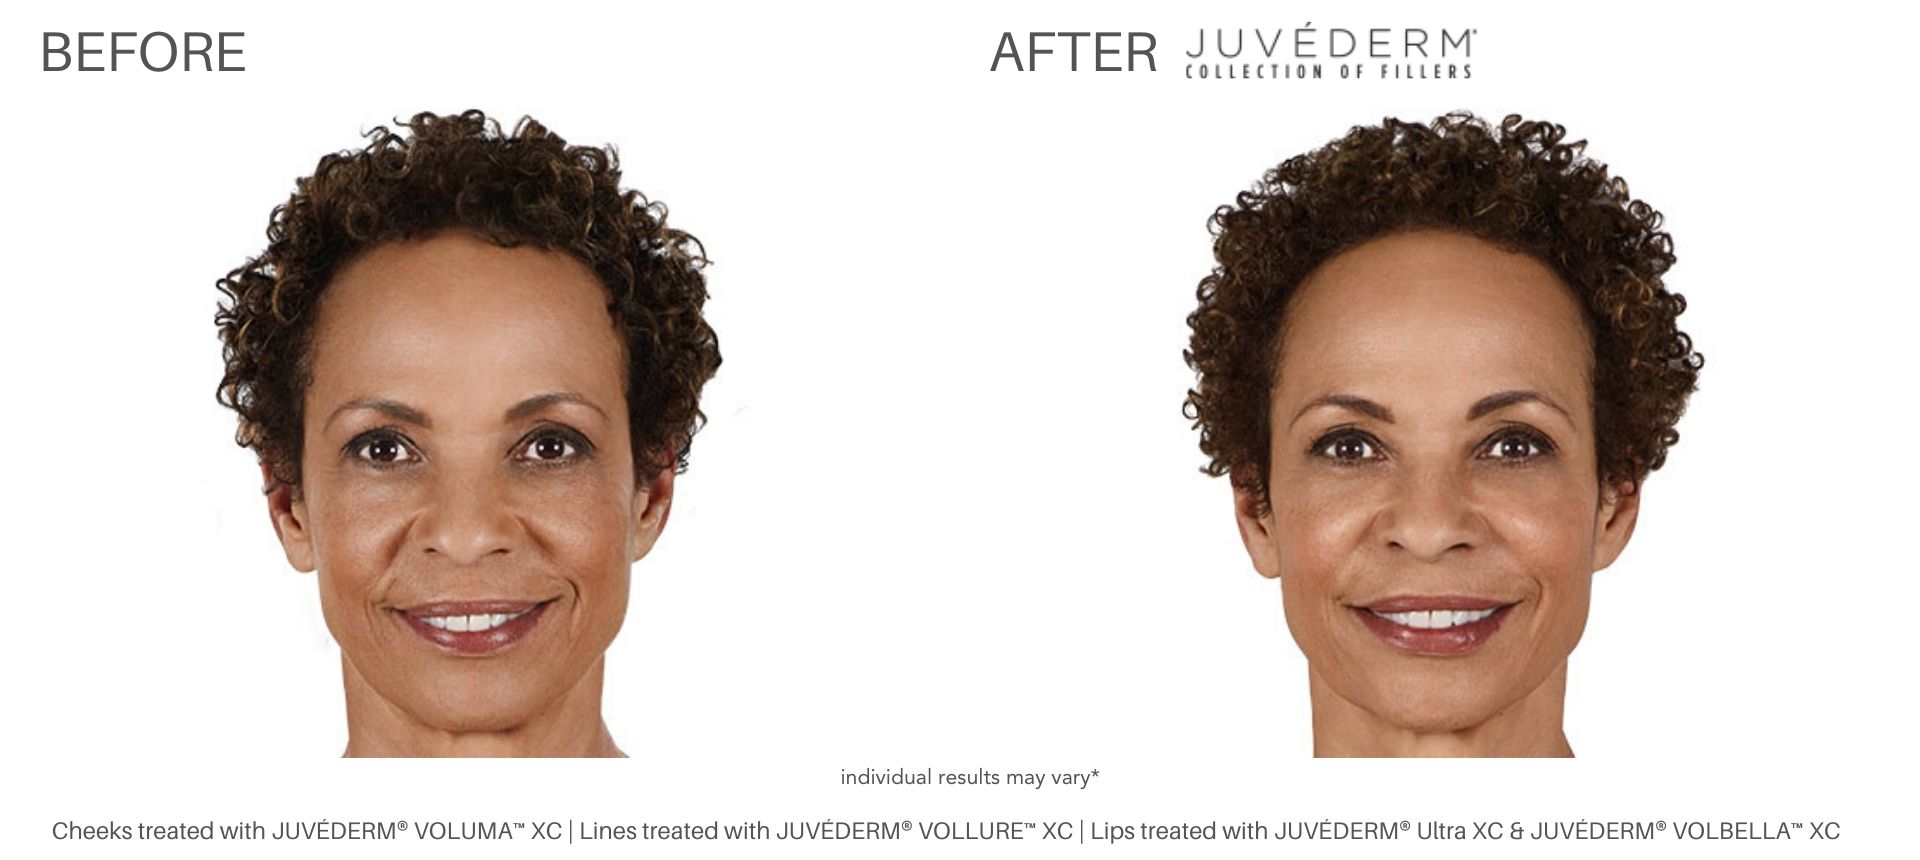 Juvéderm fillers before and after pictures Laser + Skin Institute